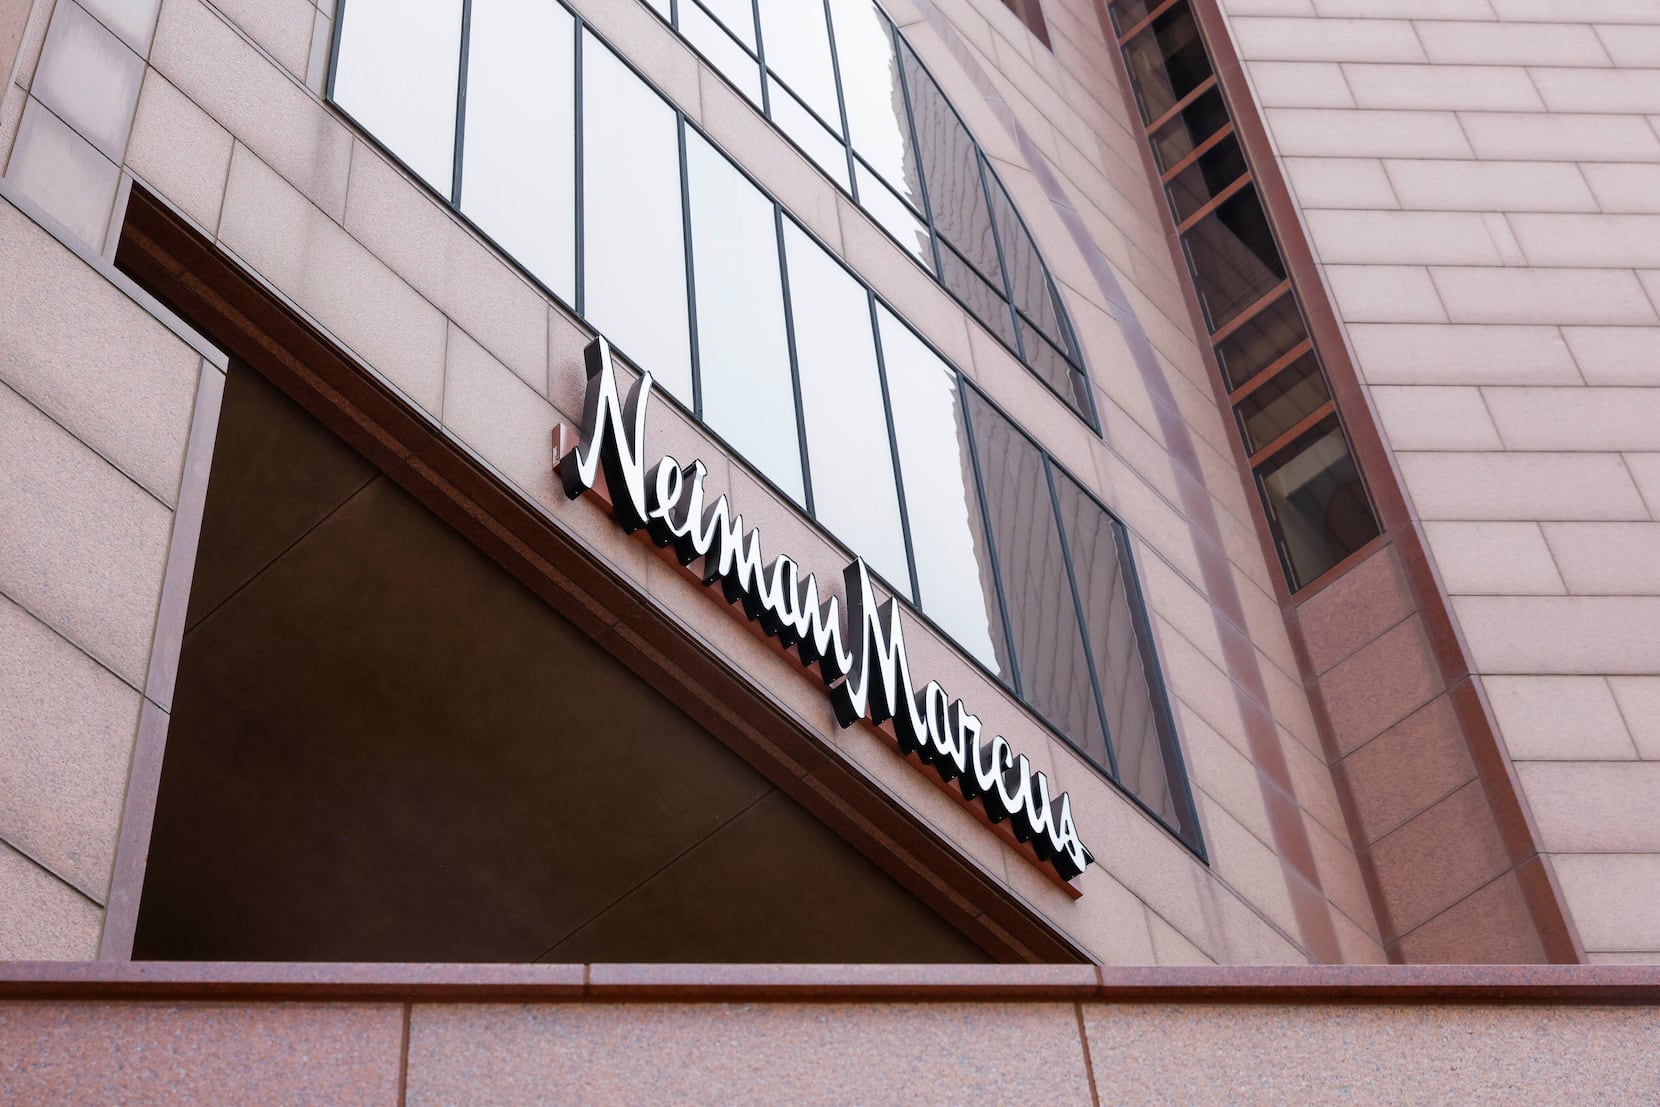 Neiman Marcus rebuilds brand after bankruptcy - Spinoso Real Estate Group